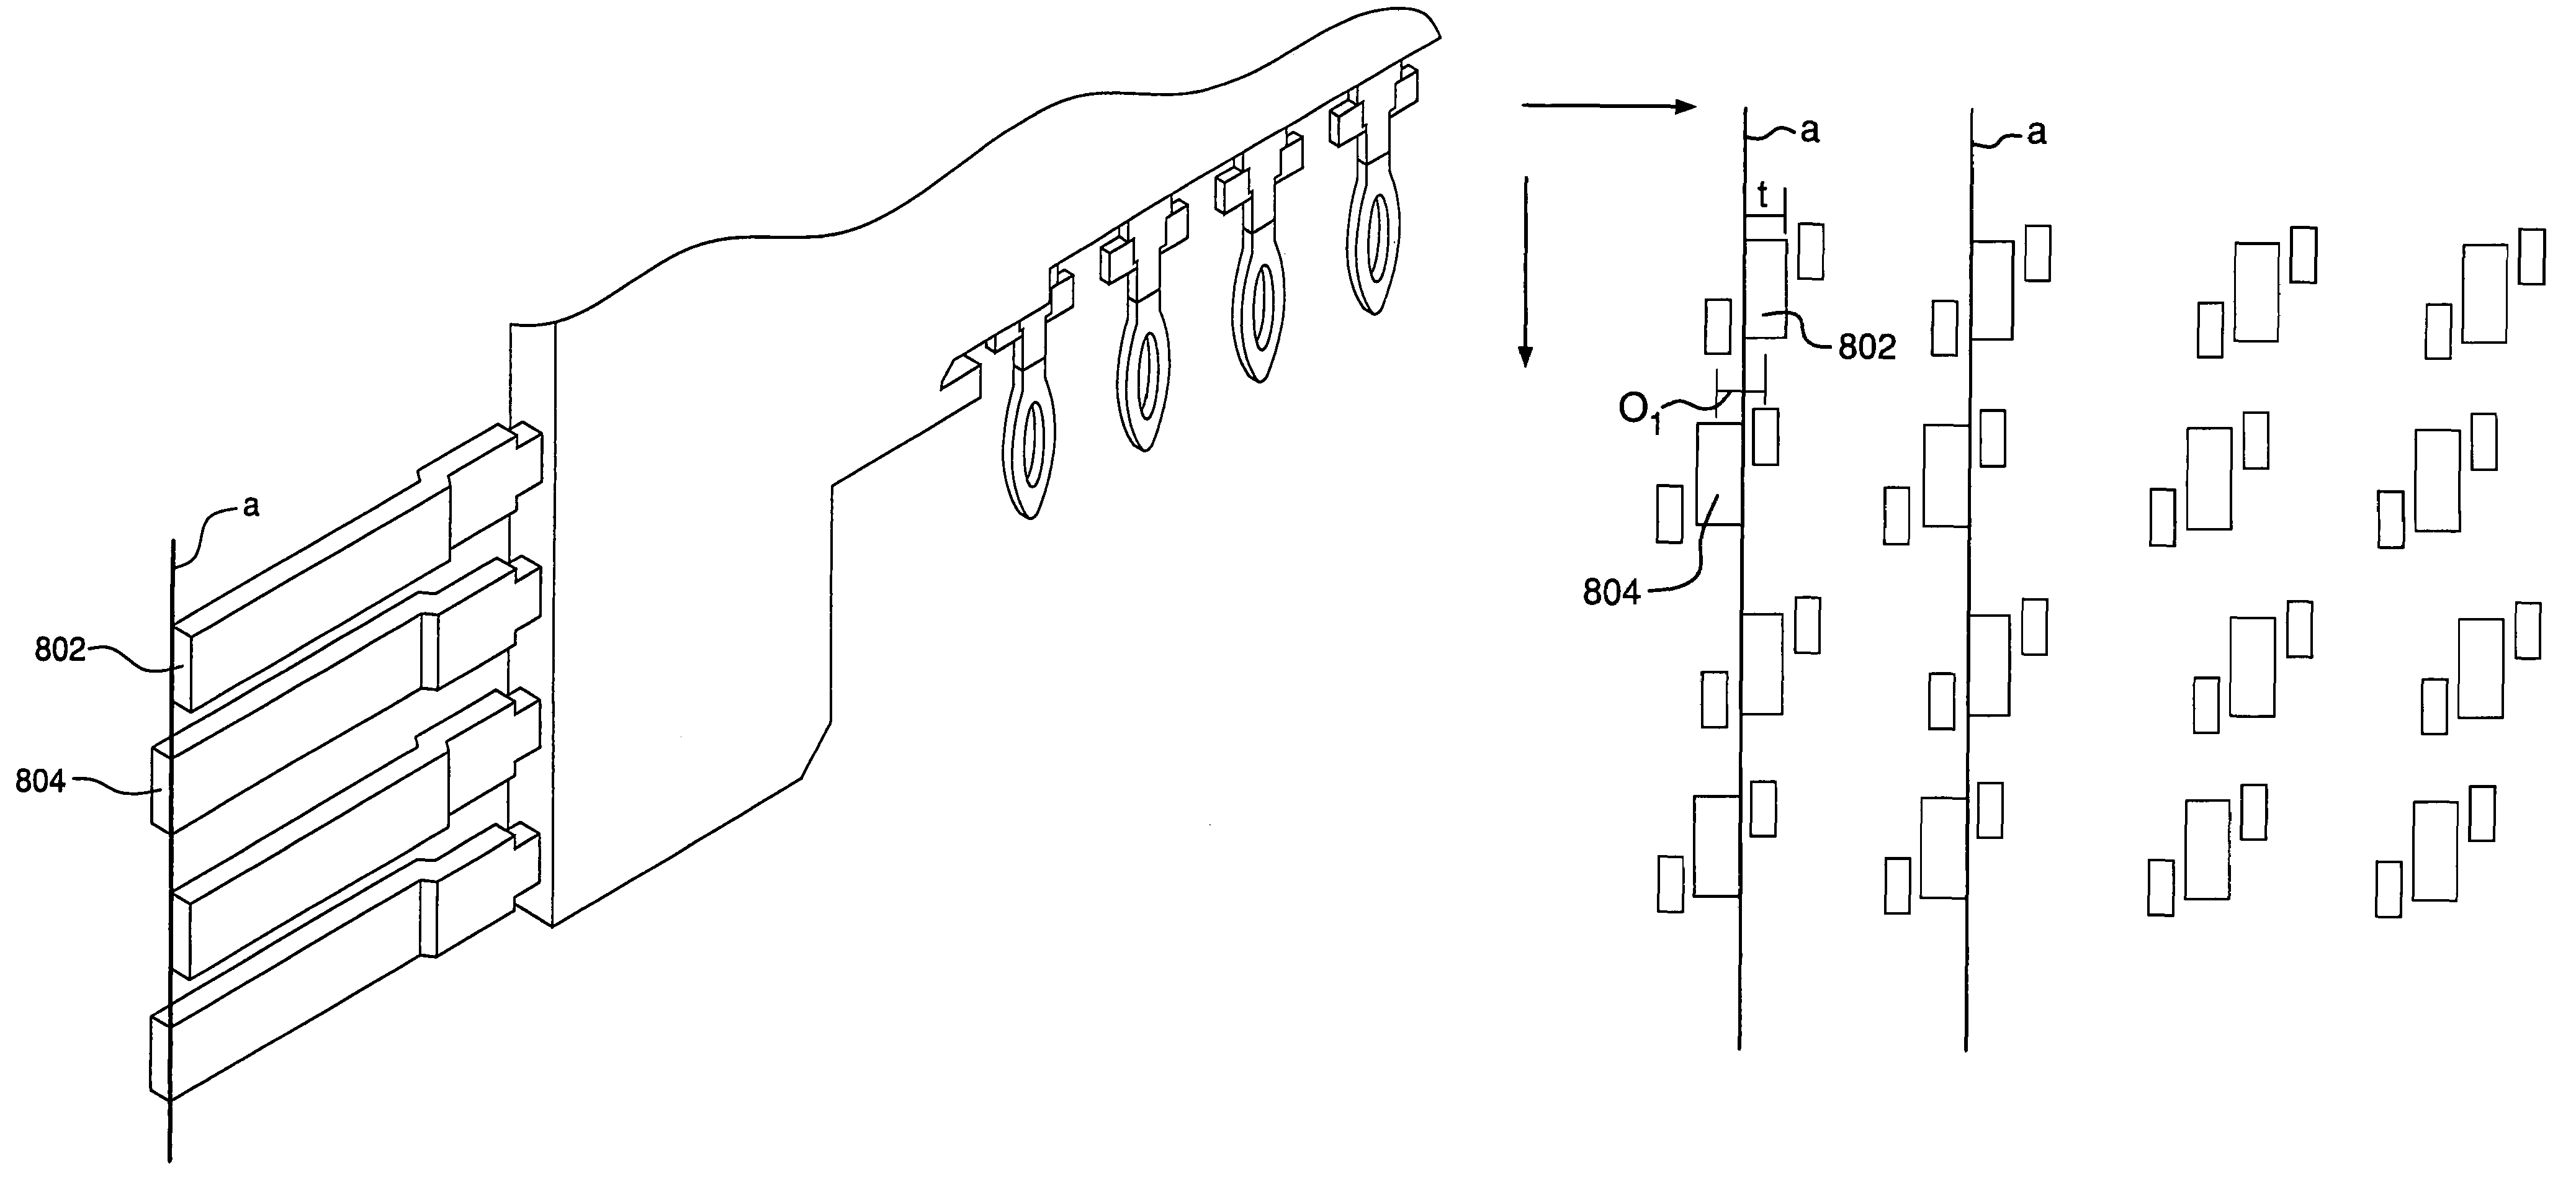 Impedance mating interface for electrical connectors